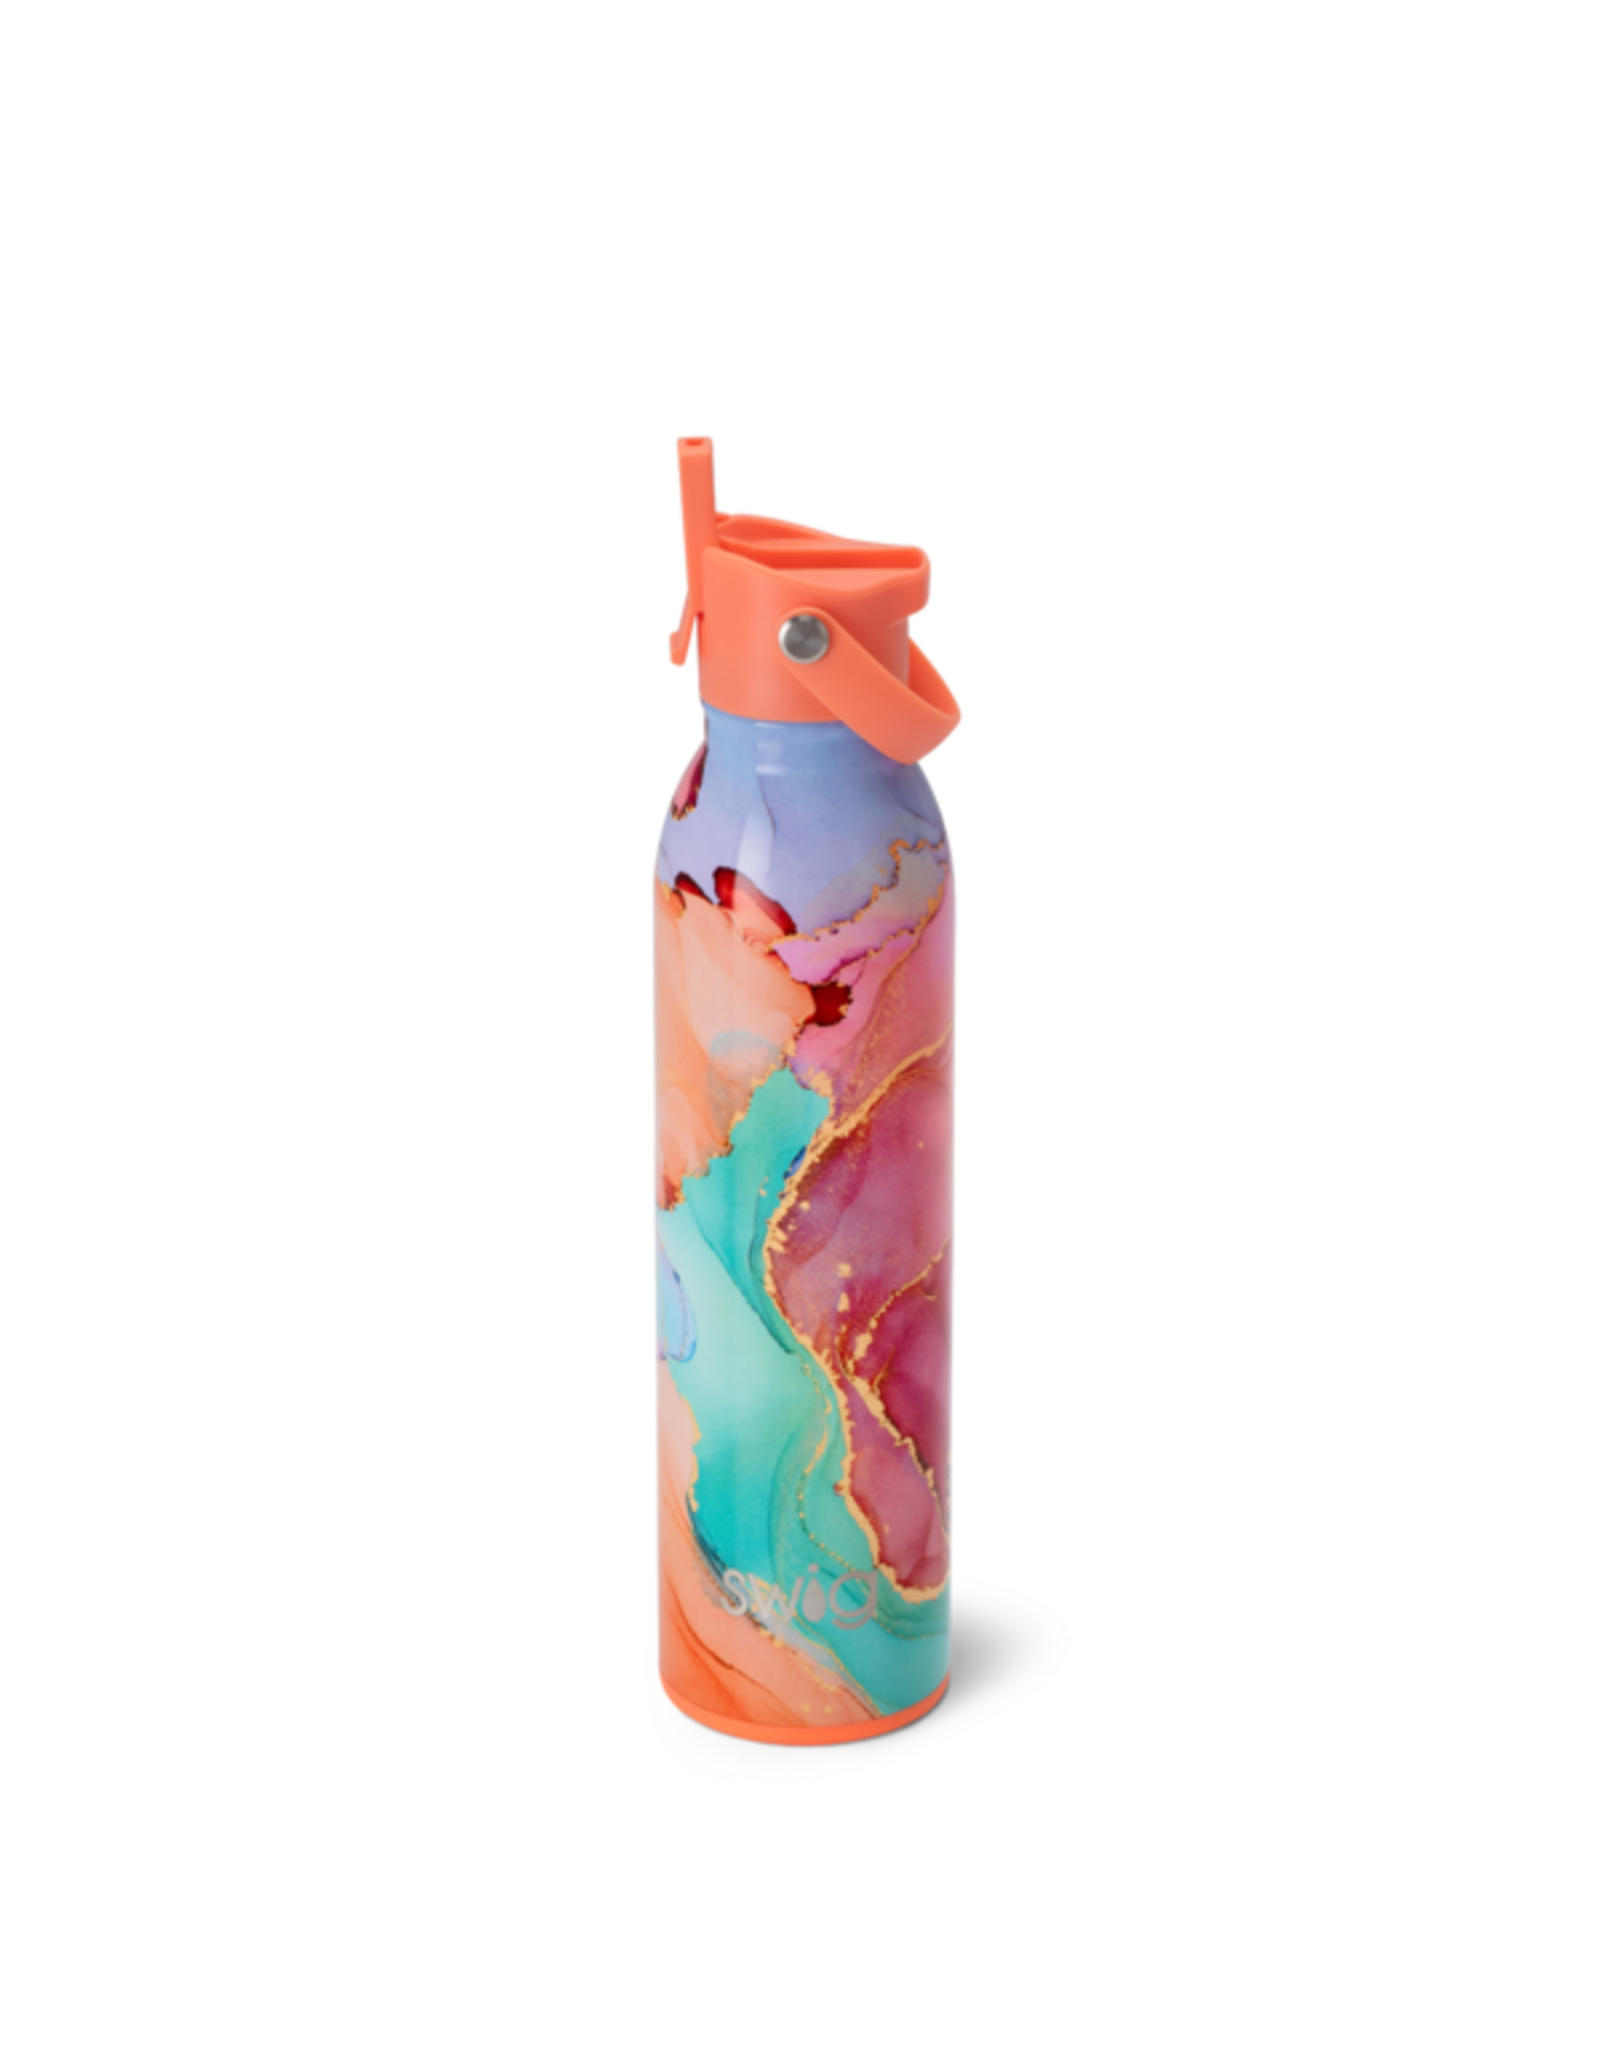 Dreamsicle  Flip and Sip Bottle 20 oz